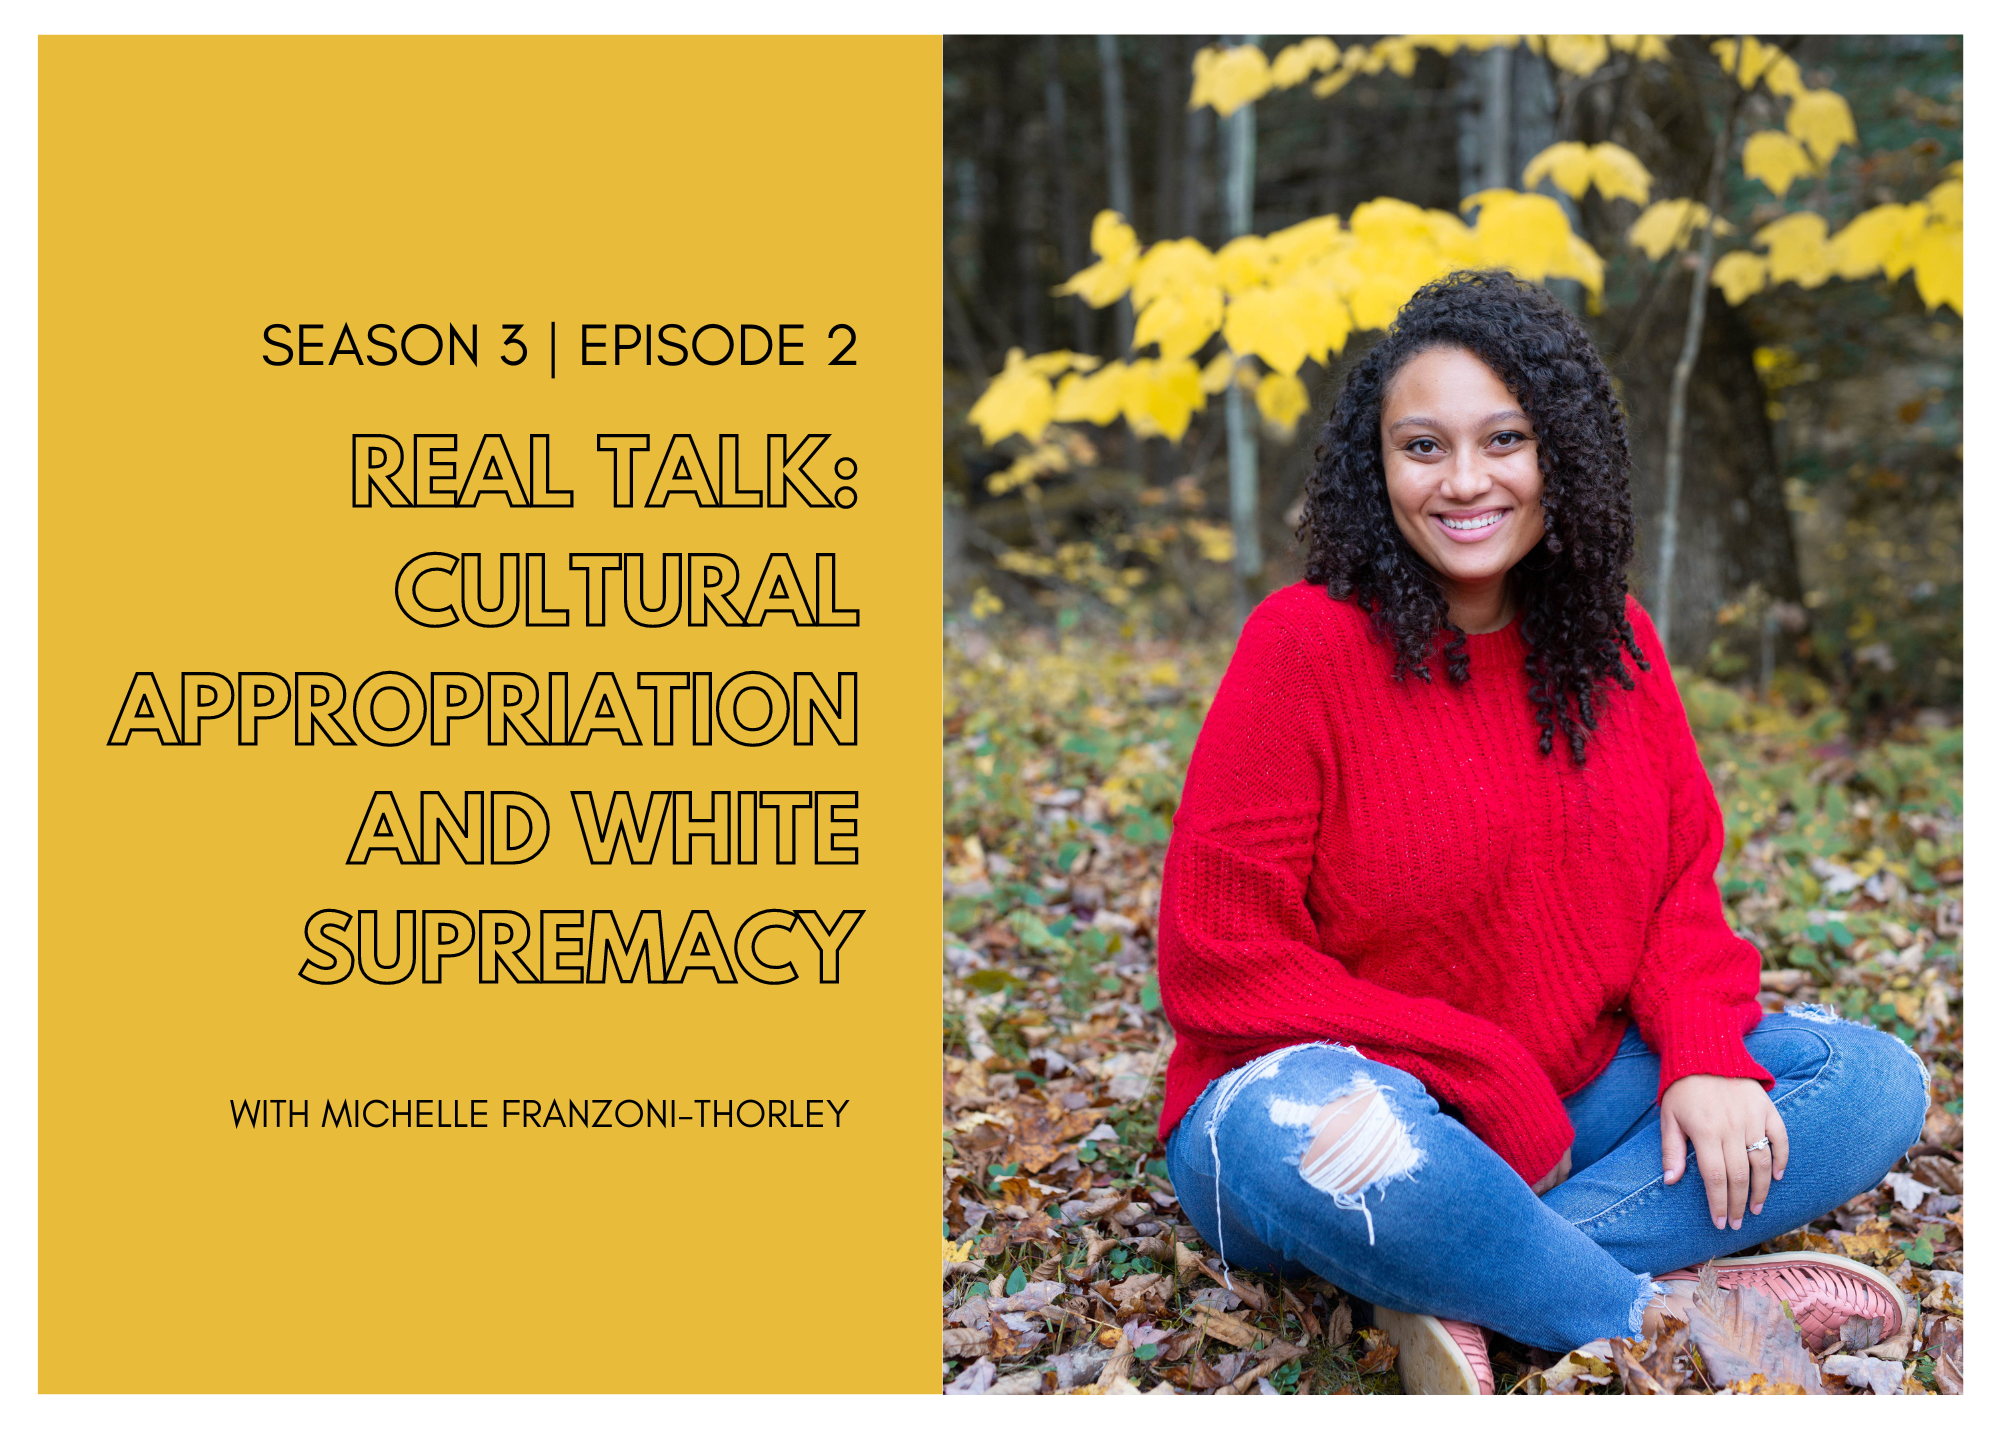 Real Talk: Cultural Appropriation and White Supremacy